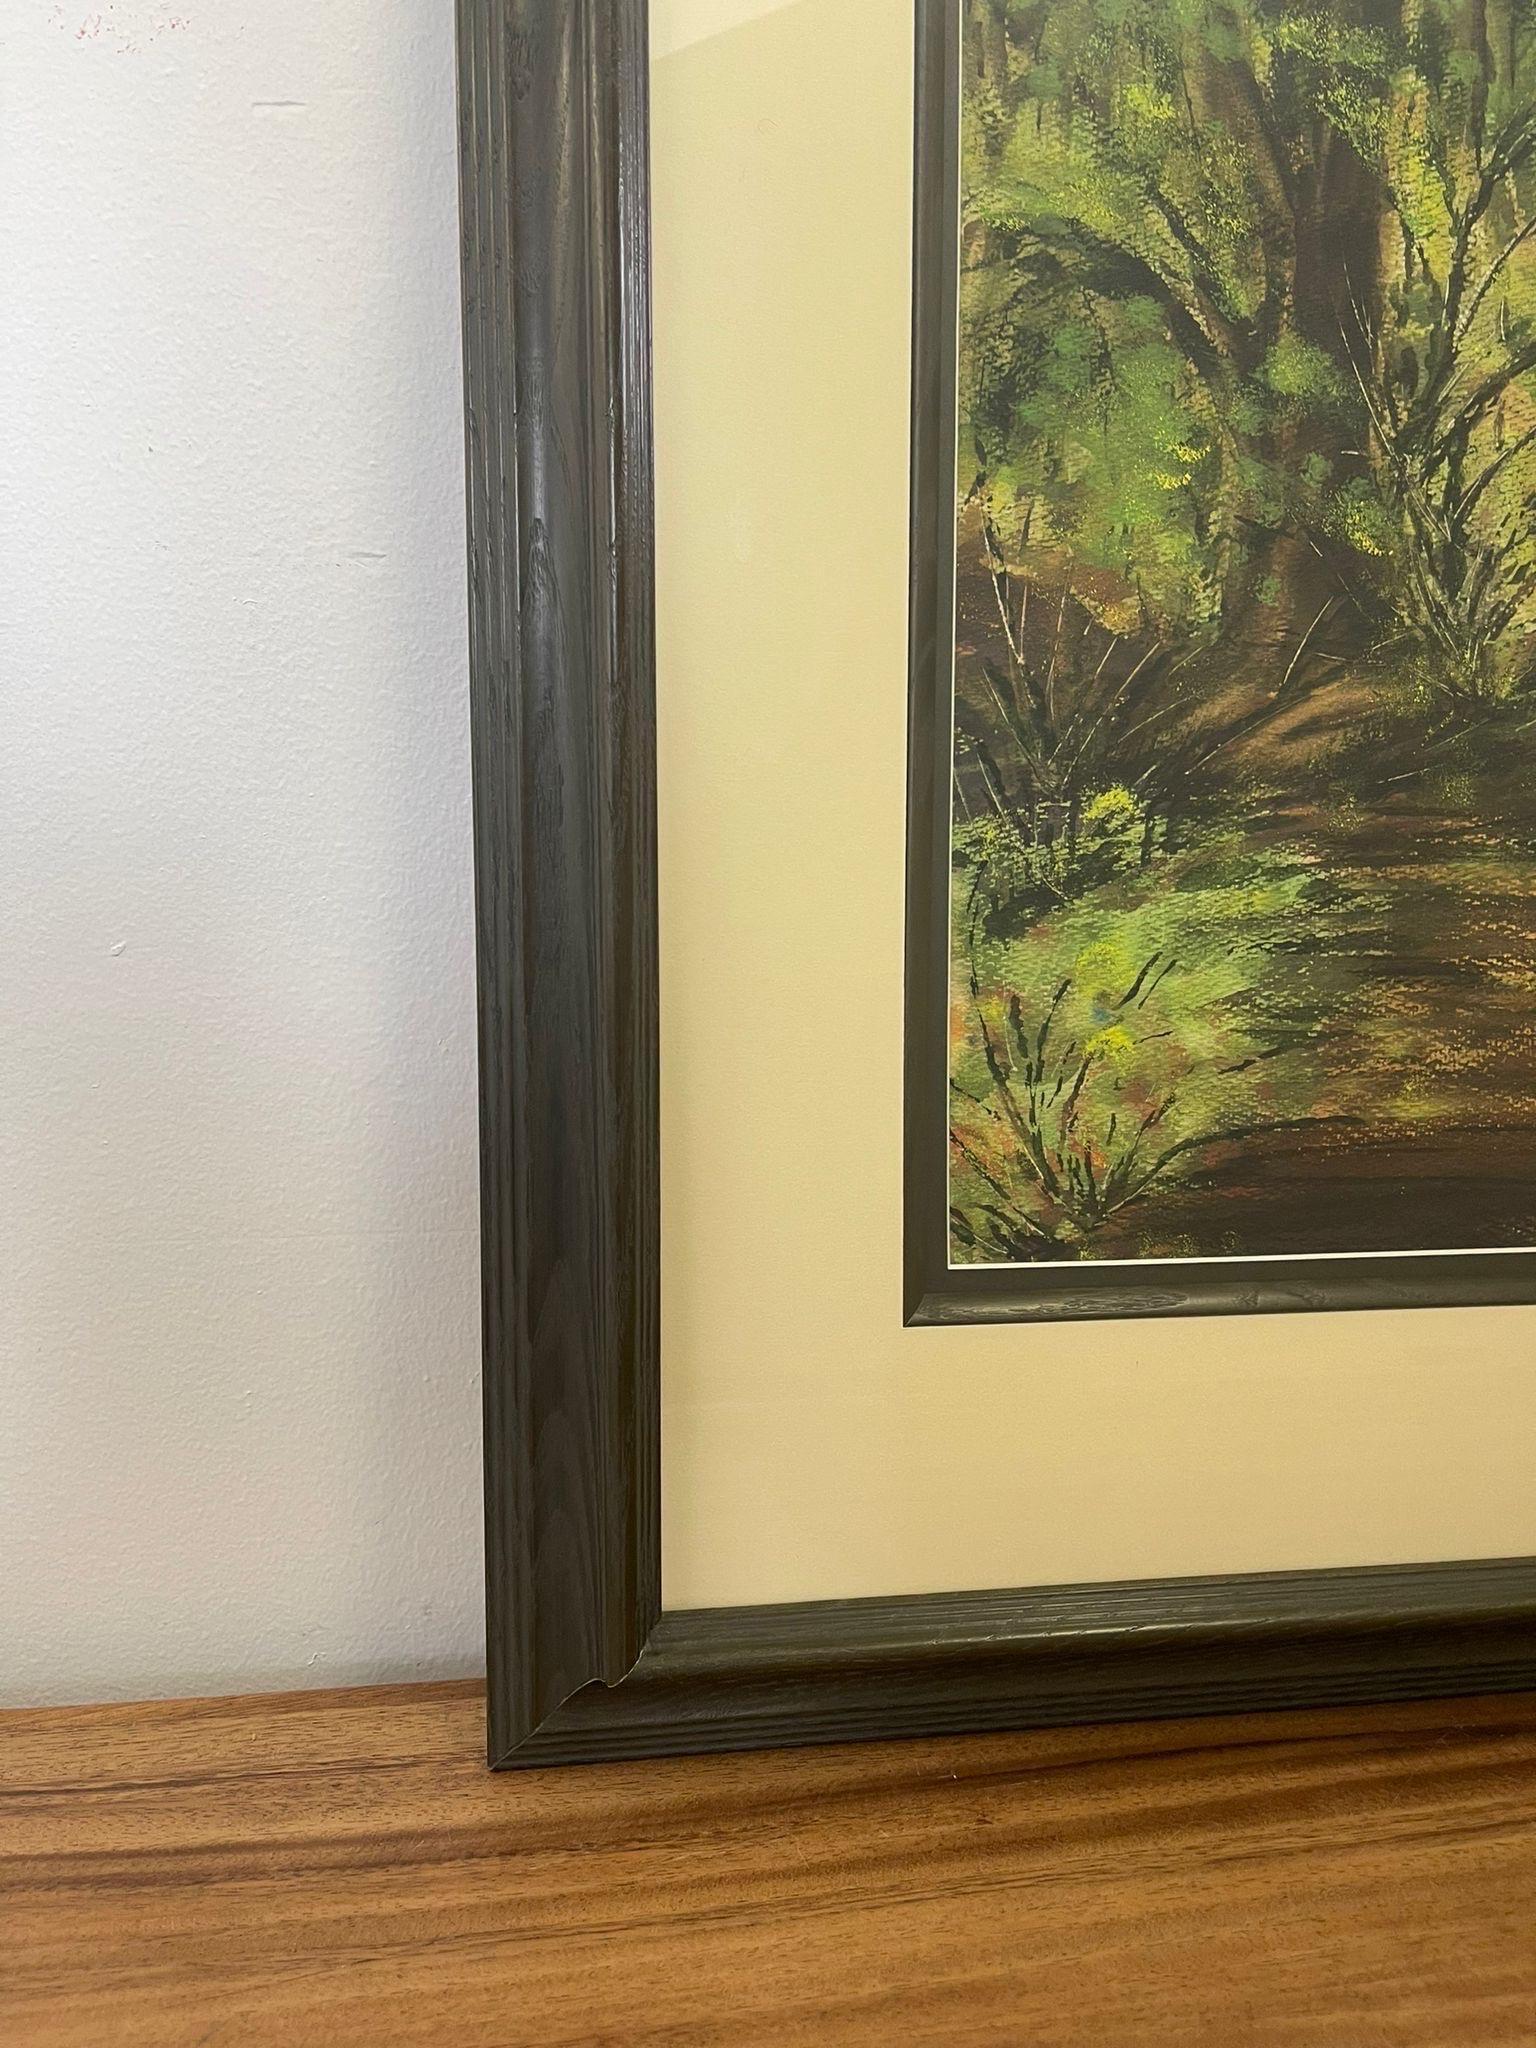 Professionally framed and matted within wooden frame. Signed in the Lower Corner.Beautiful textile and line Work. Vintage Condition Consistent with Age as Pictured.

Dimensions. 24 W ; 3/4 D ; 31 H